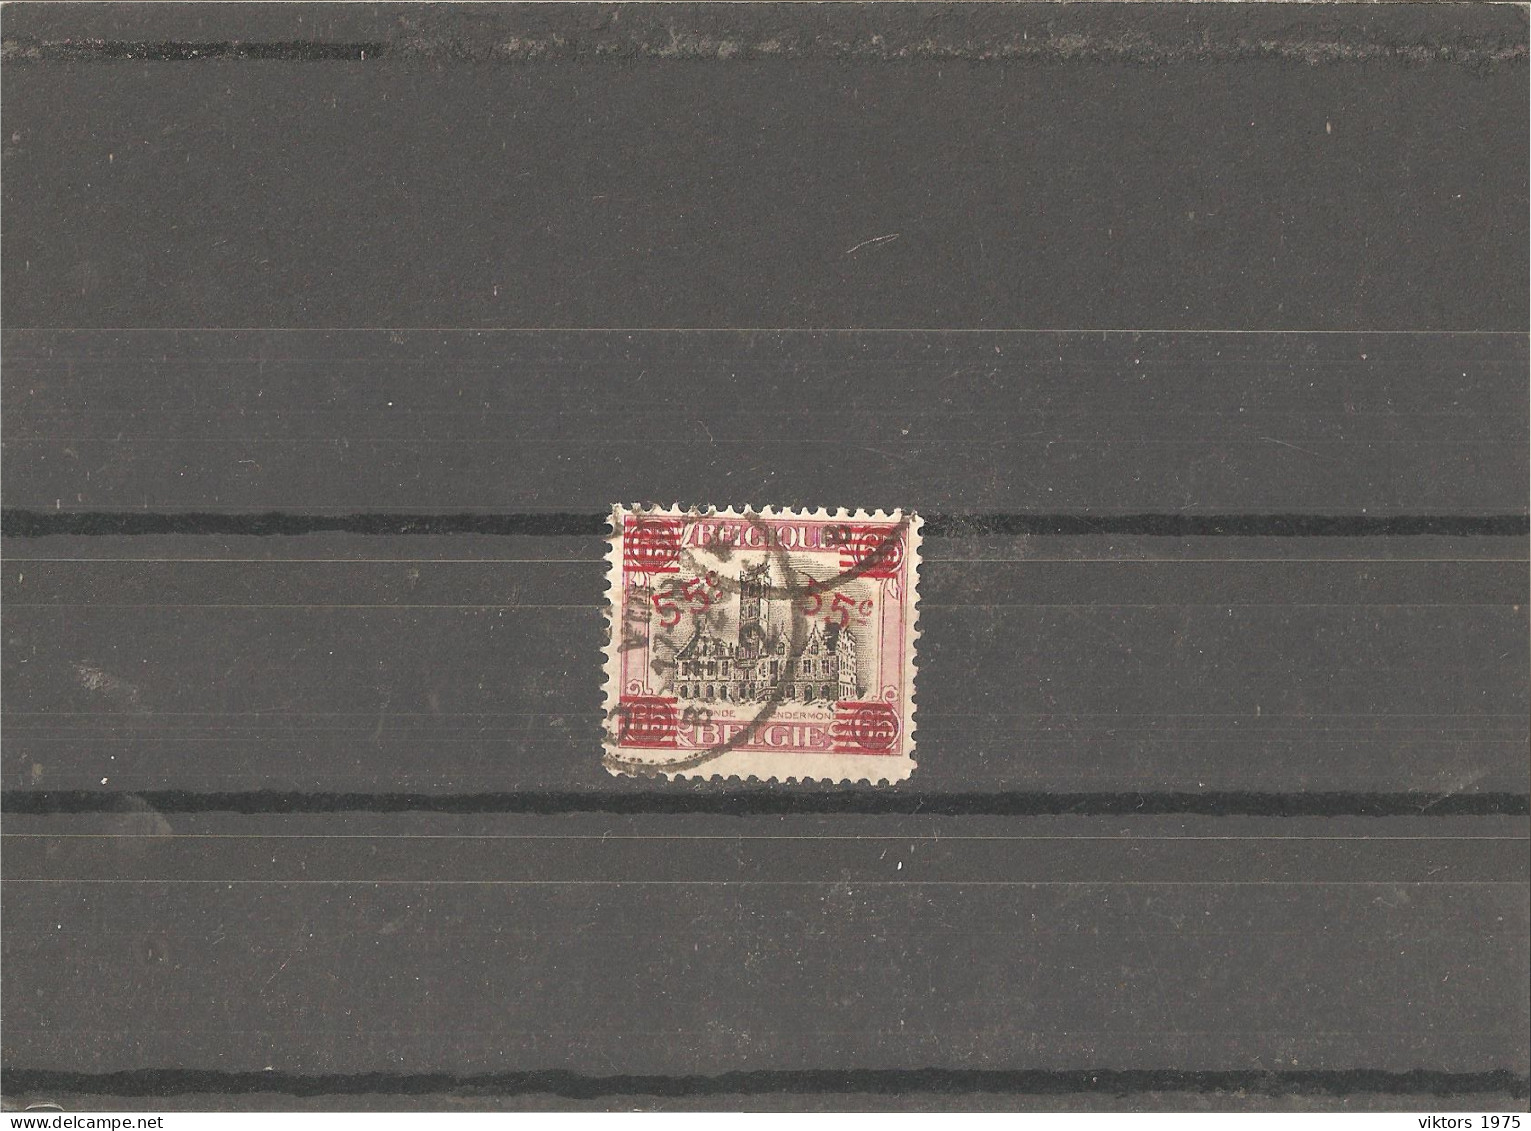 Used Stamp Nr.168 In MICHEL Catalog - Used Stamps